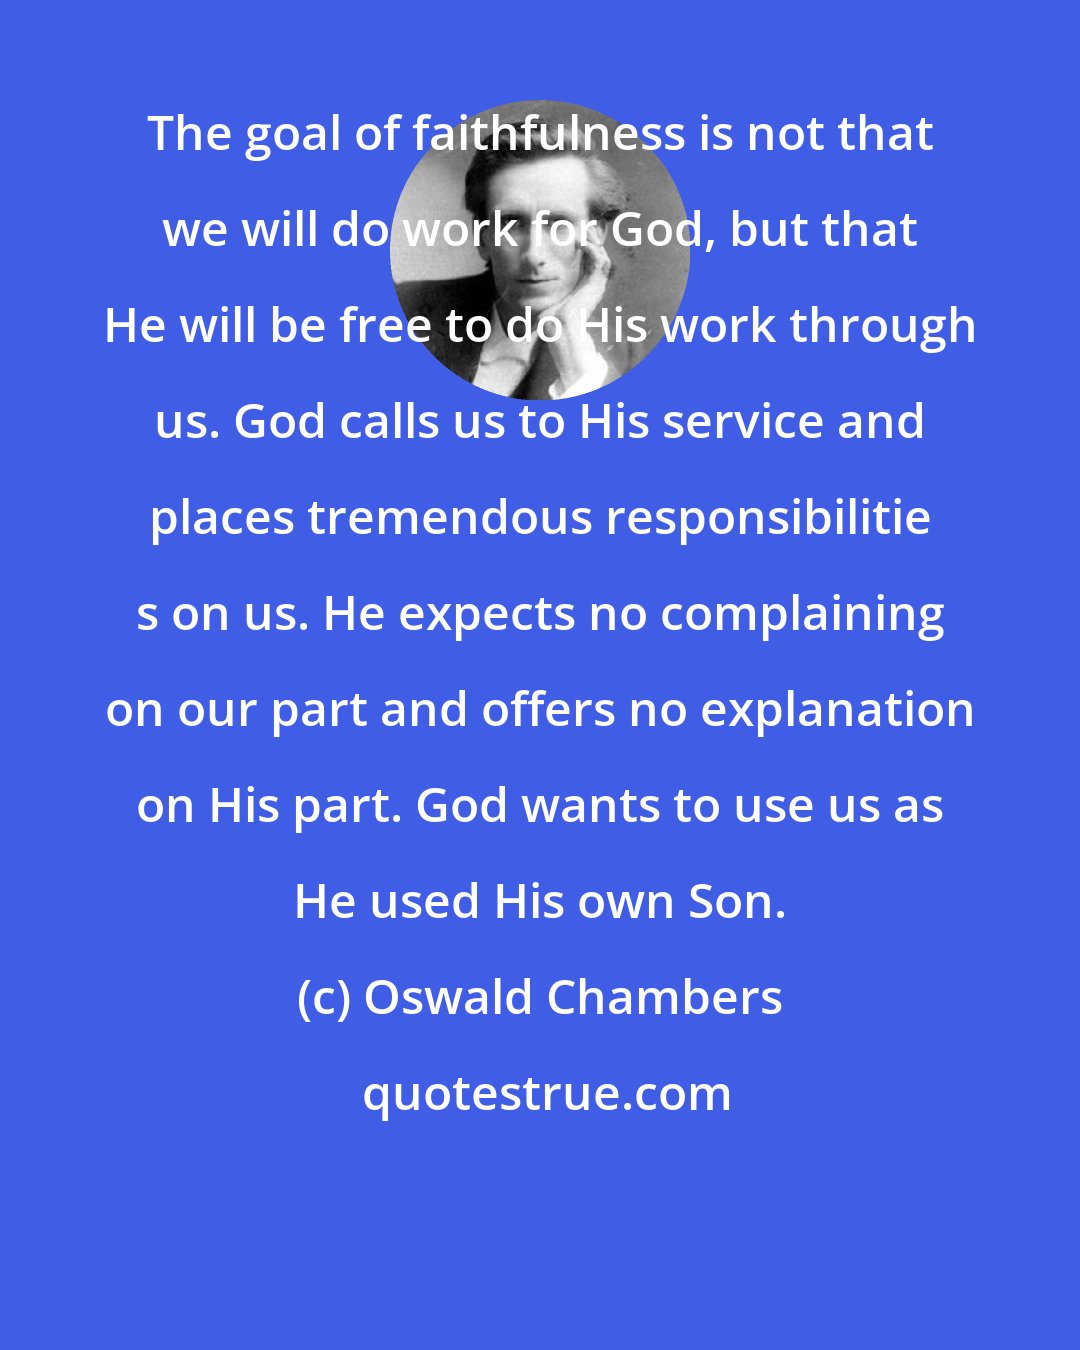 Oswald Chambers: The goal of faithfulness is not that we will do work for God, but that He will be free to do His work through us. God calls us to His service and places tremendous responsibilitie s on us. He expects no complaining on our part and offers no explanation on His part. God wants to use us as He used His own Son.